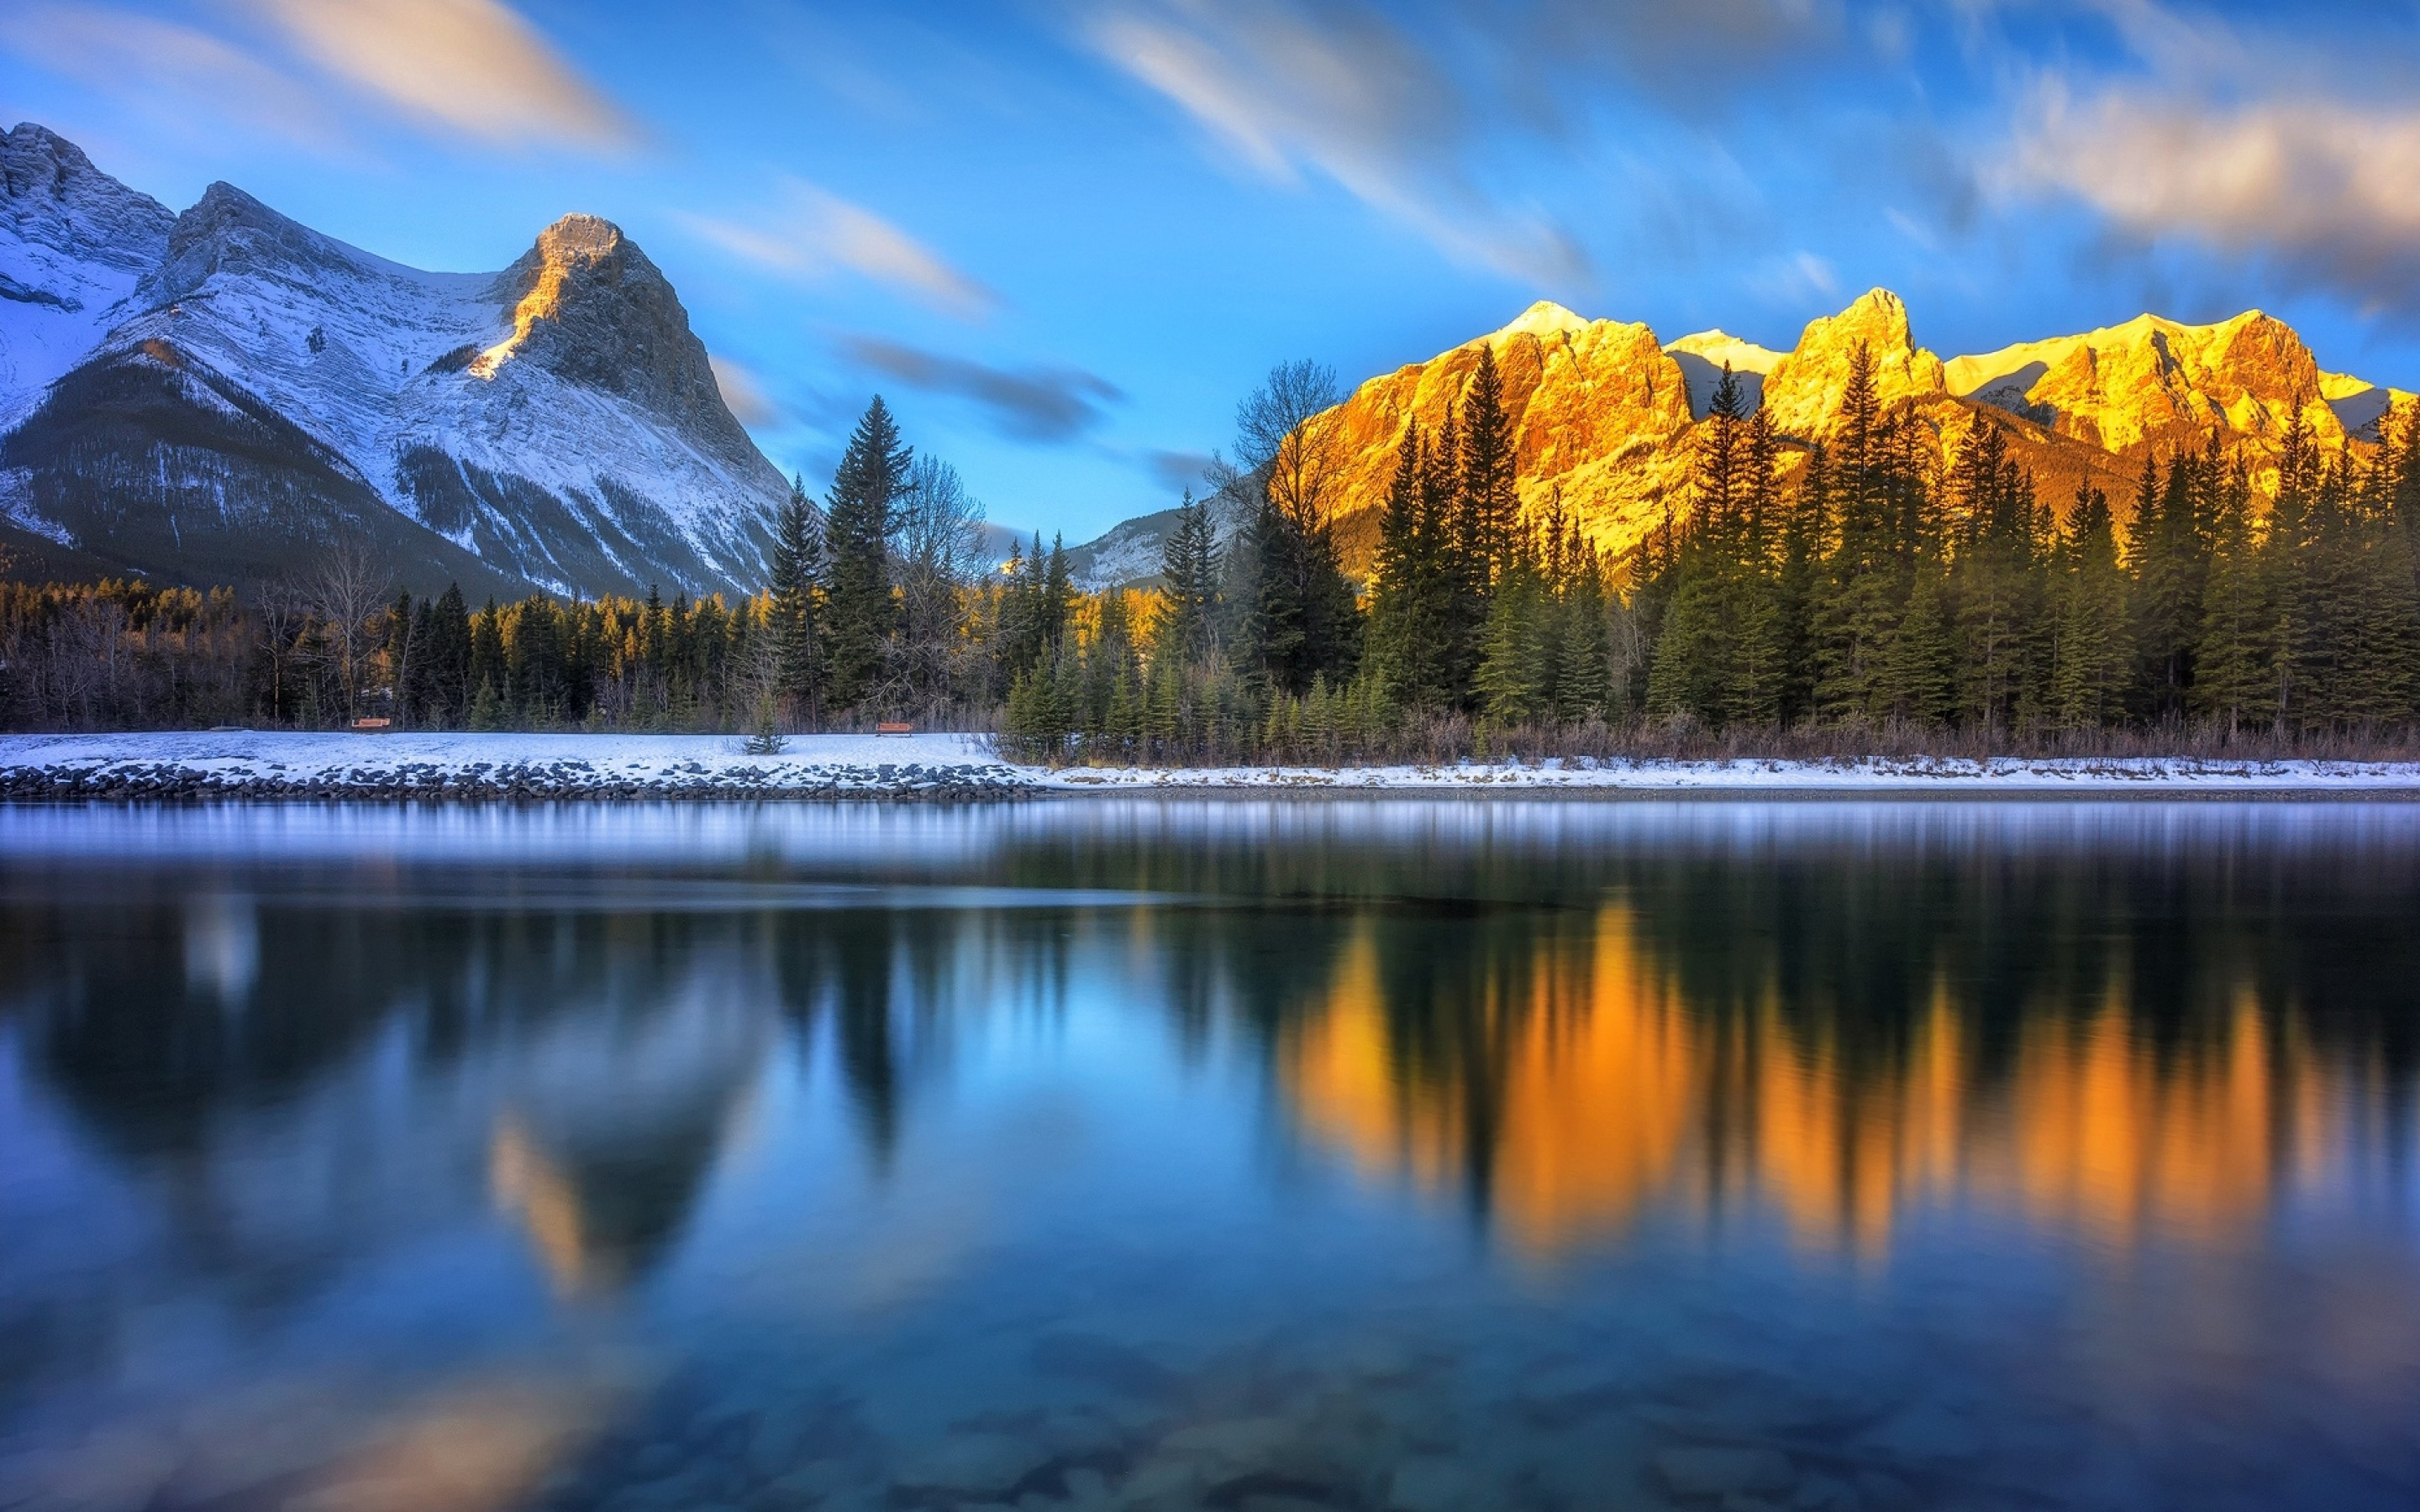 Download 2880x1800 Canada, Mountain, Lake, Reflection, Trees, Clouds, Scenic, Relaxing Wallpaper for MacBook Pro 15 inch